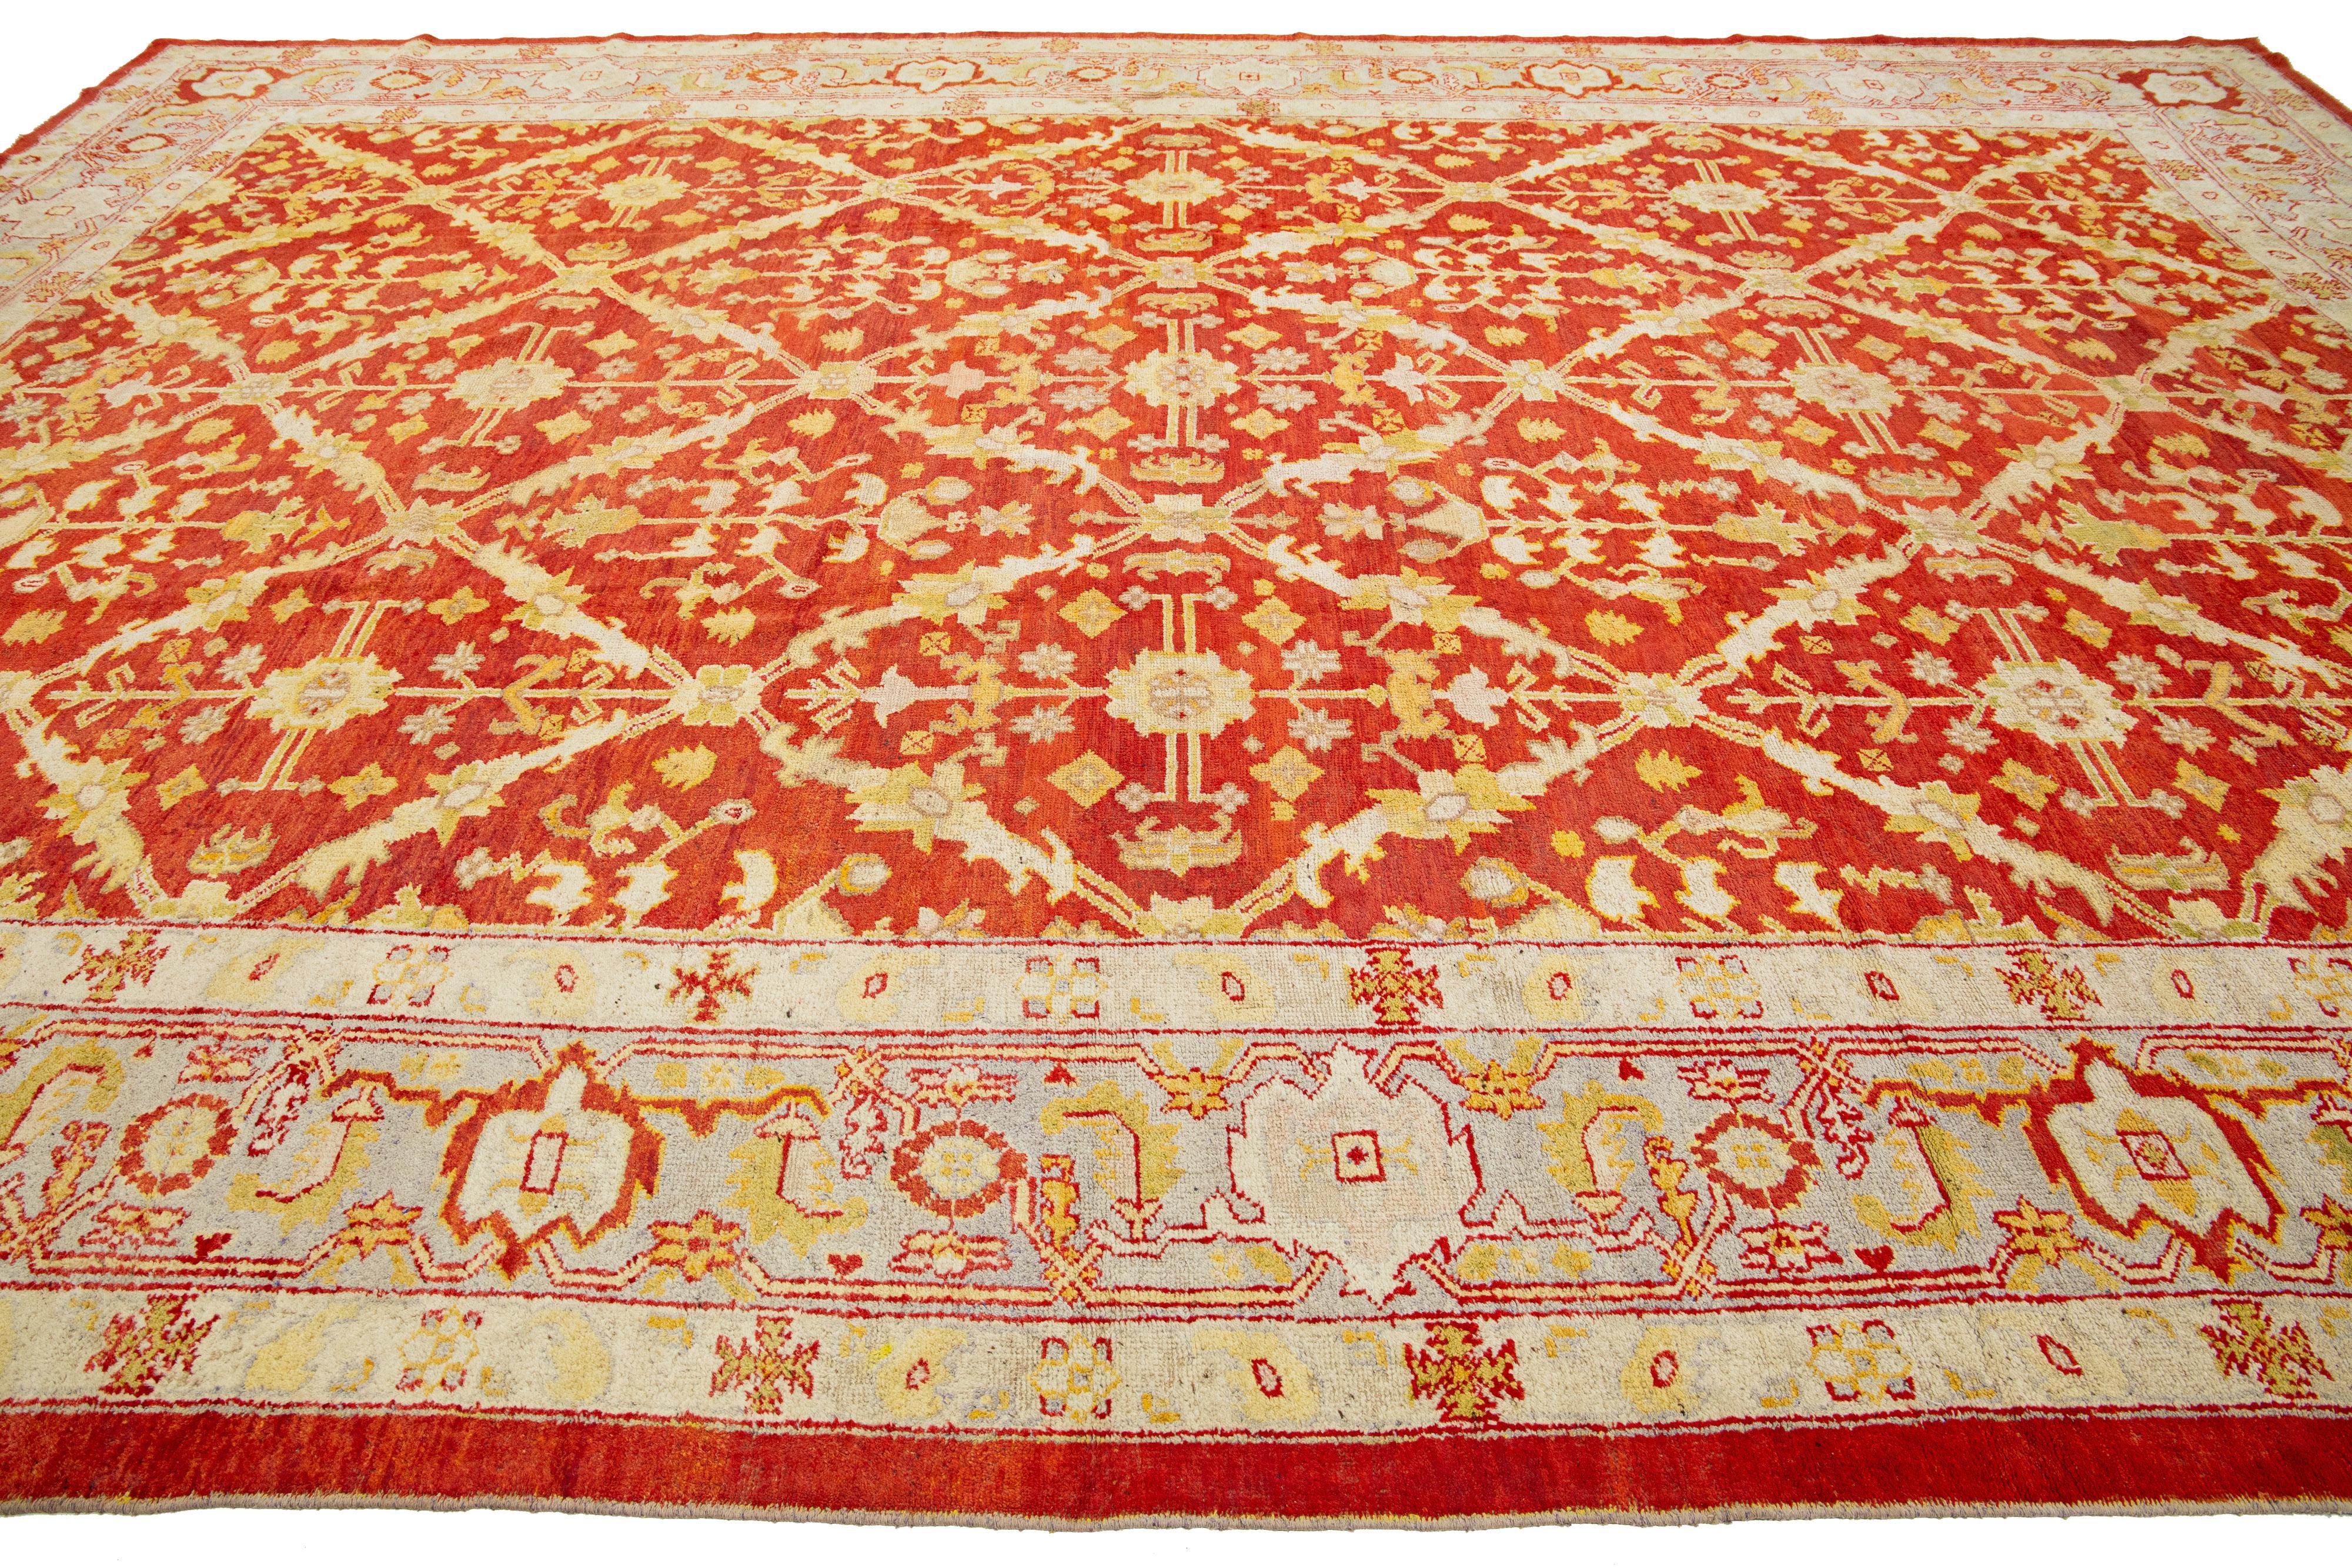 Handmade Red Turkish Oushak Wool Rug Featuring a Floral Pattern From The 1880's For Sale 1